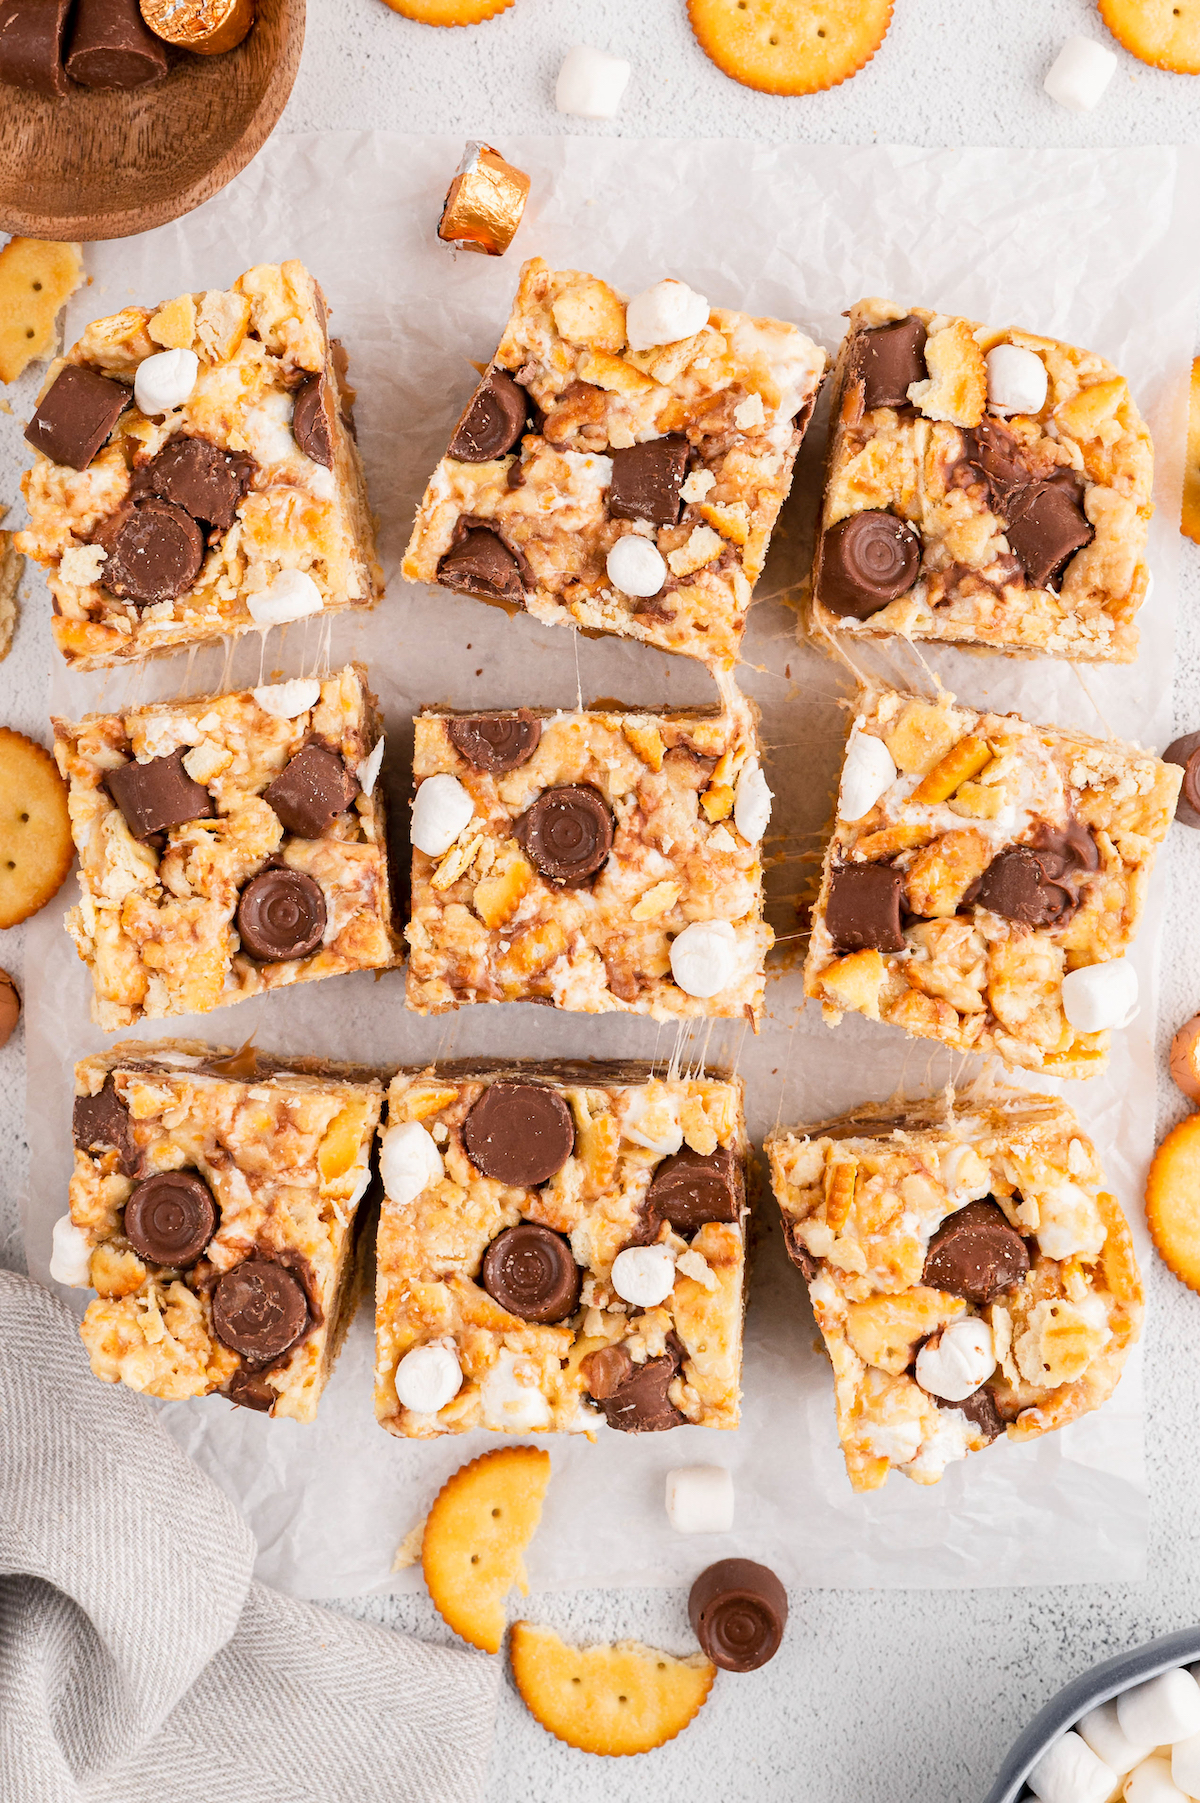 Overhead shot of nine marshmallow treat bars on a sheet of parchment, with Ritz crackers, Rolos, and marshmallow scattered around.